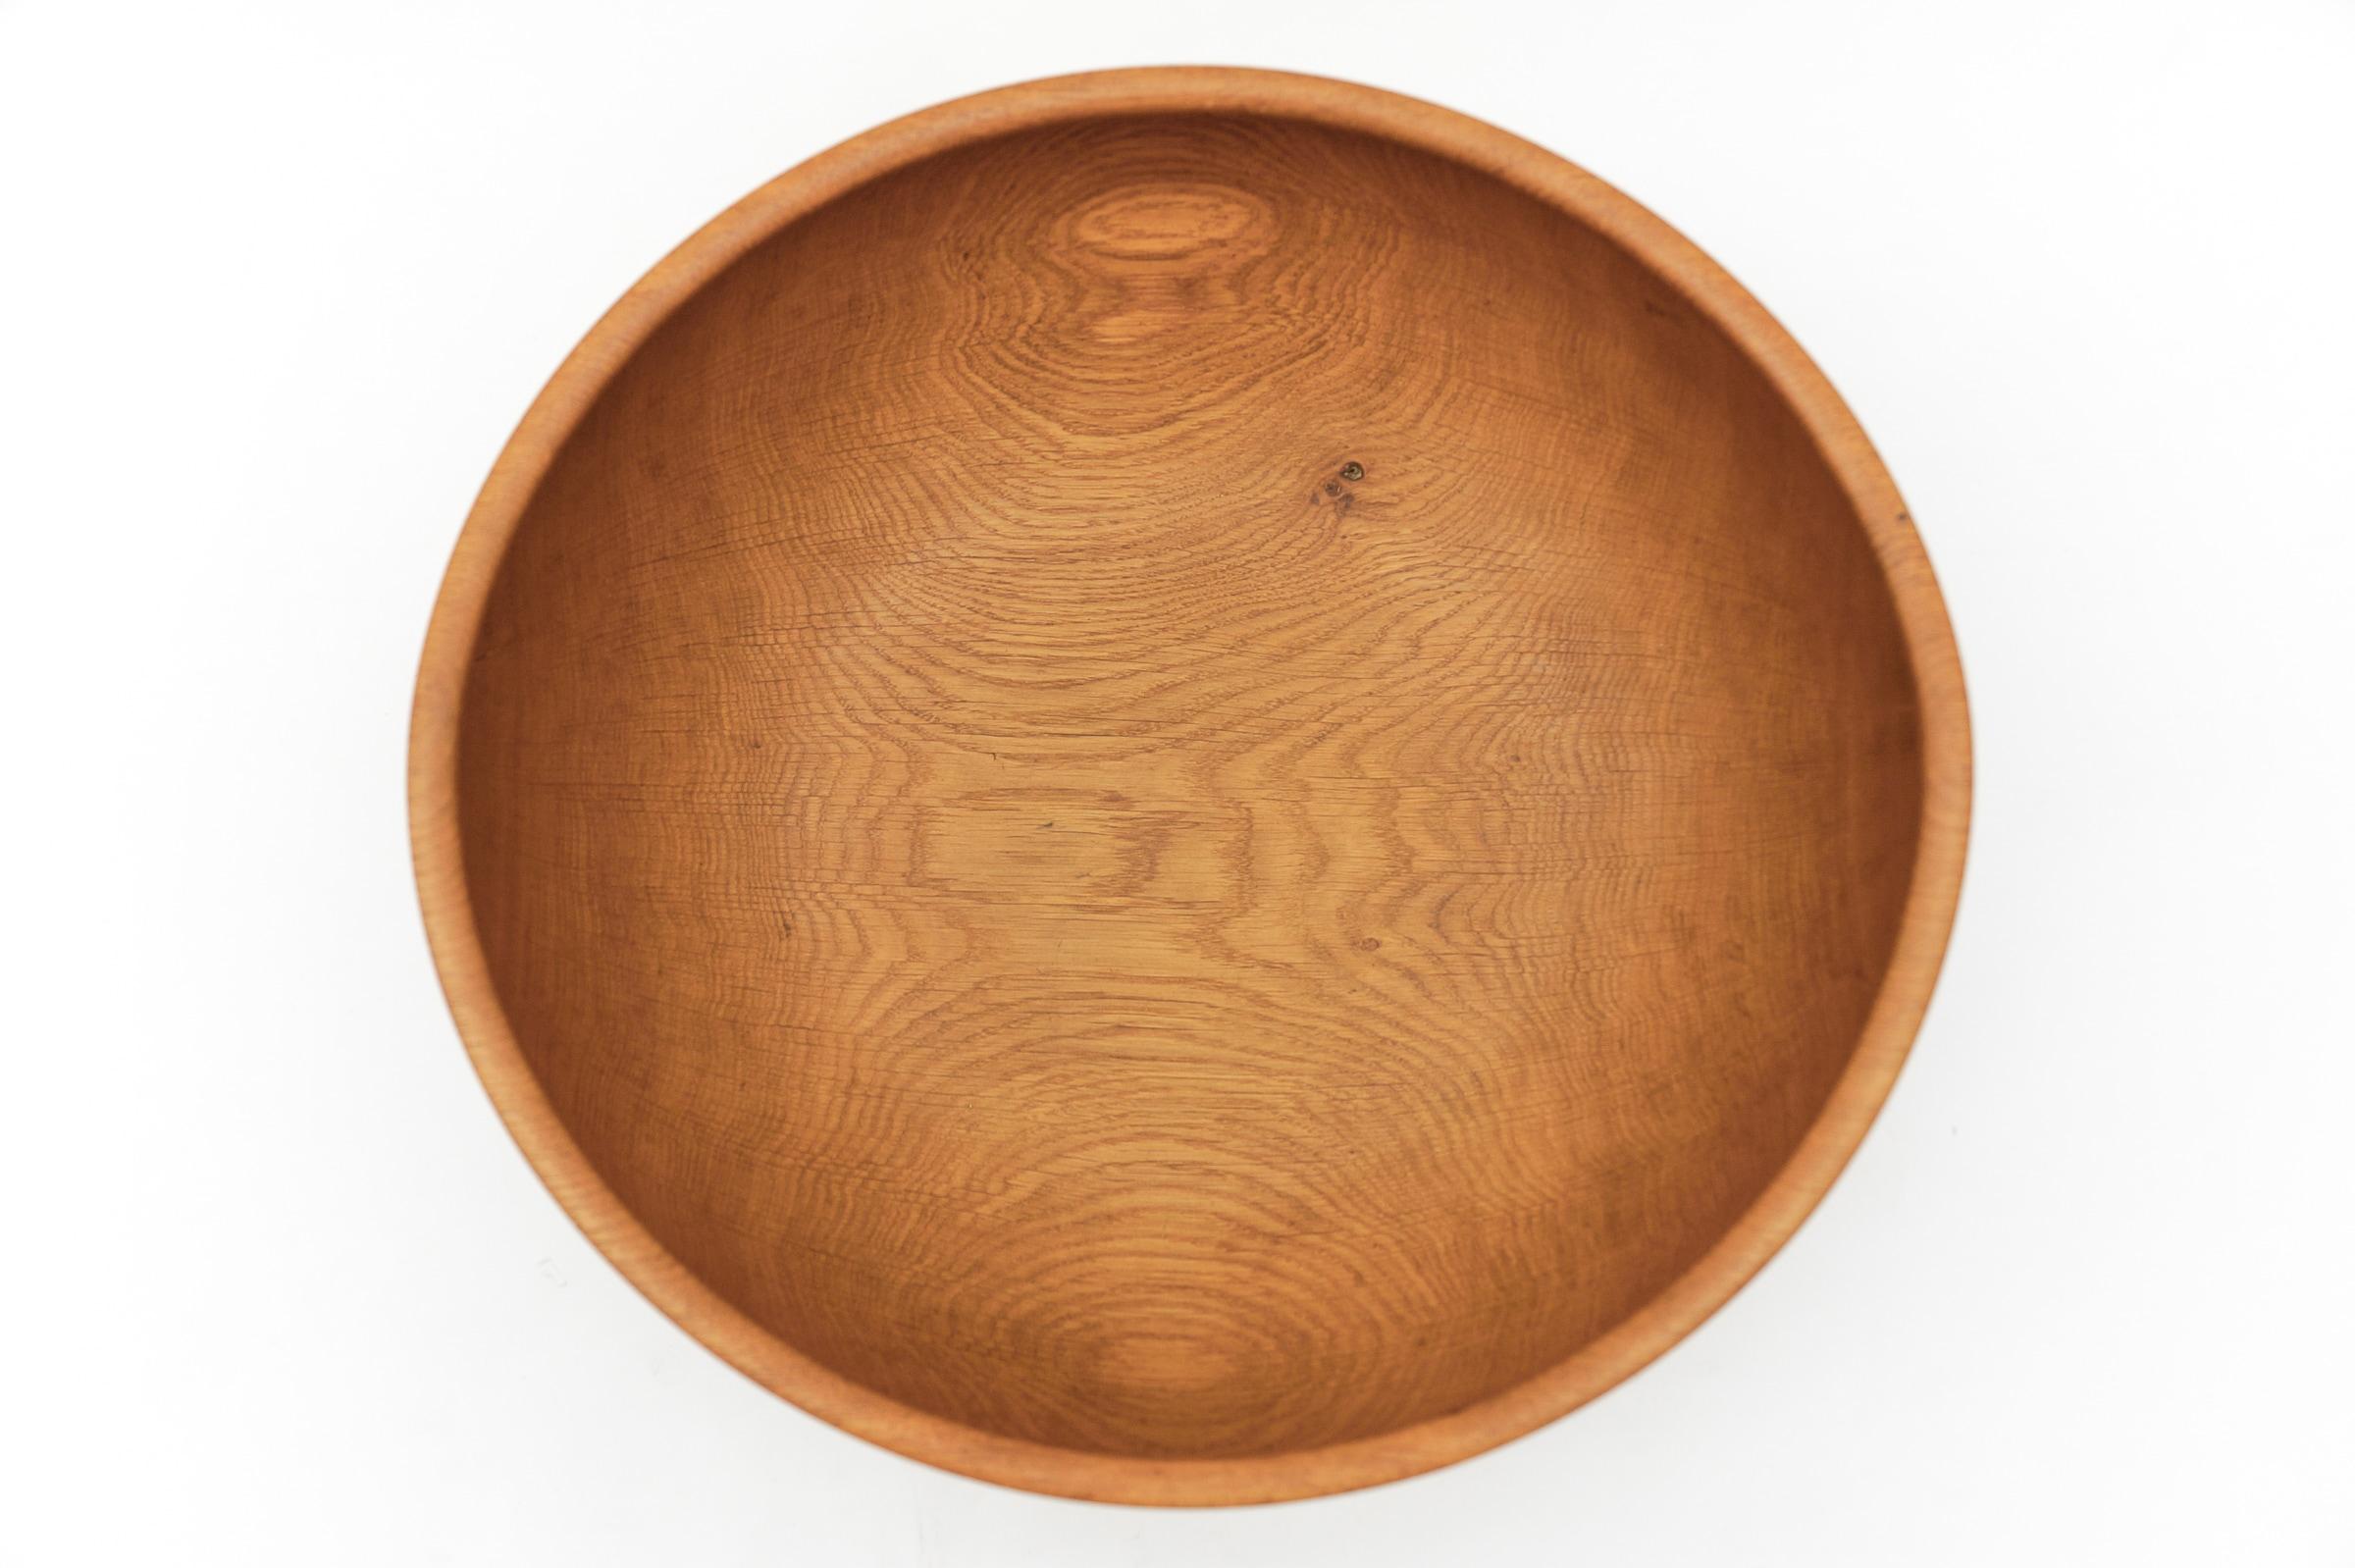 Awesome Huge Mid-Century Modern Oak Bowl by K. Weichselbaum, 1999 Germany For Sale 7